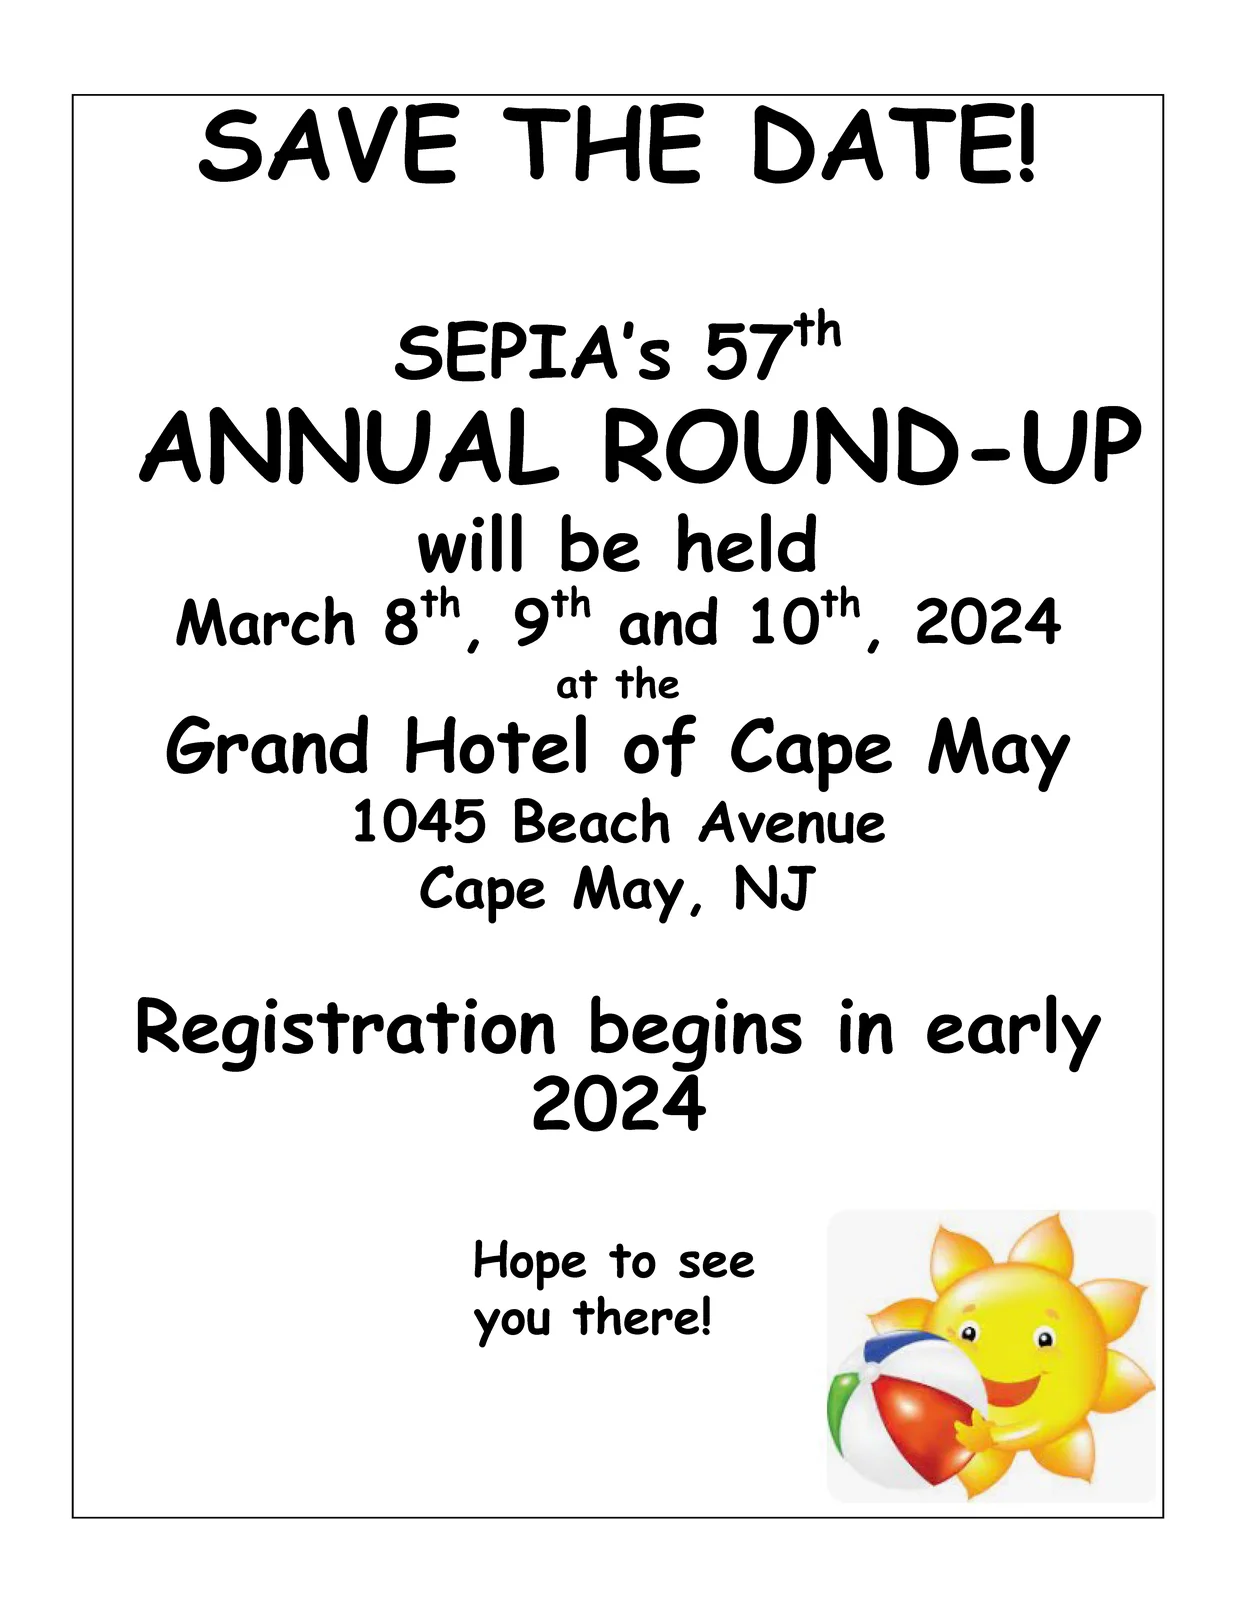 Save the Date Round-Up 2024